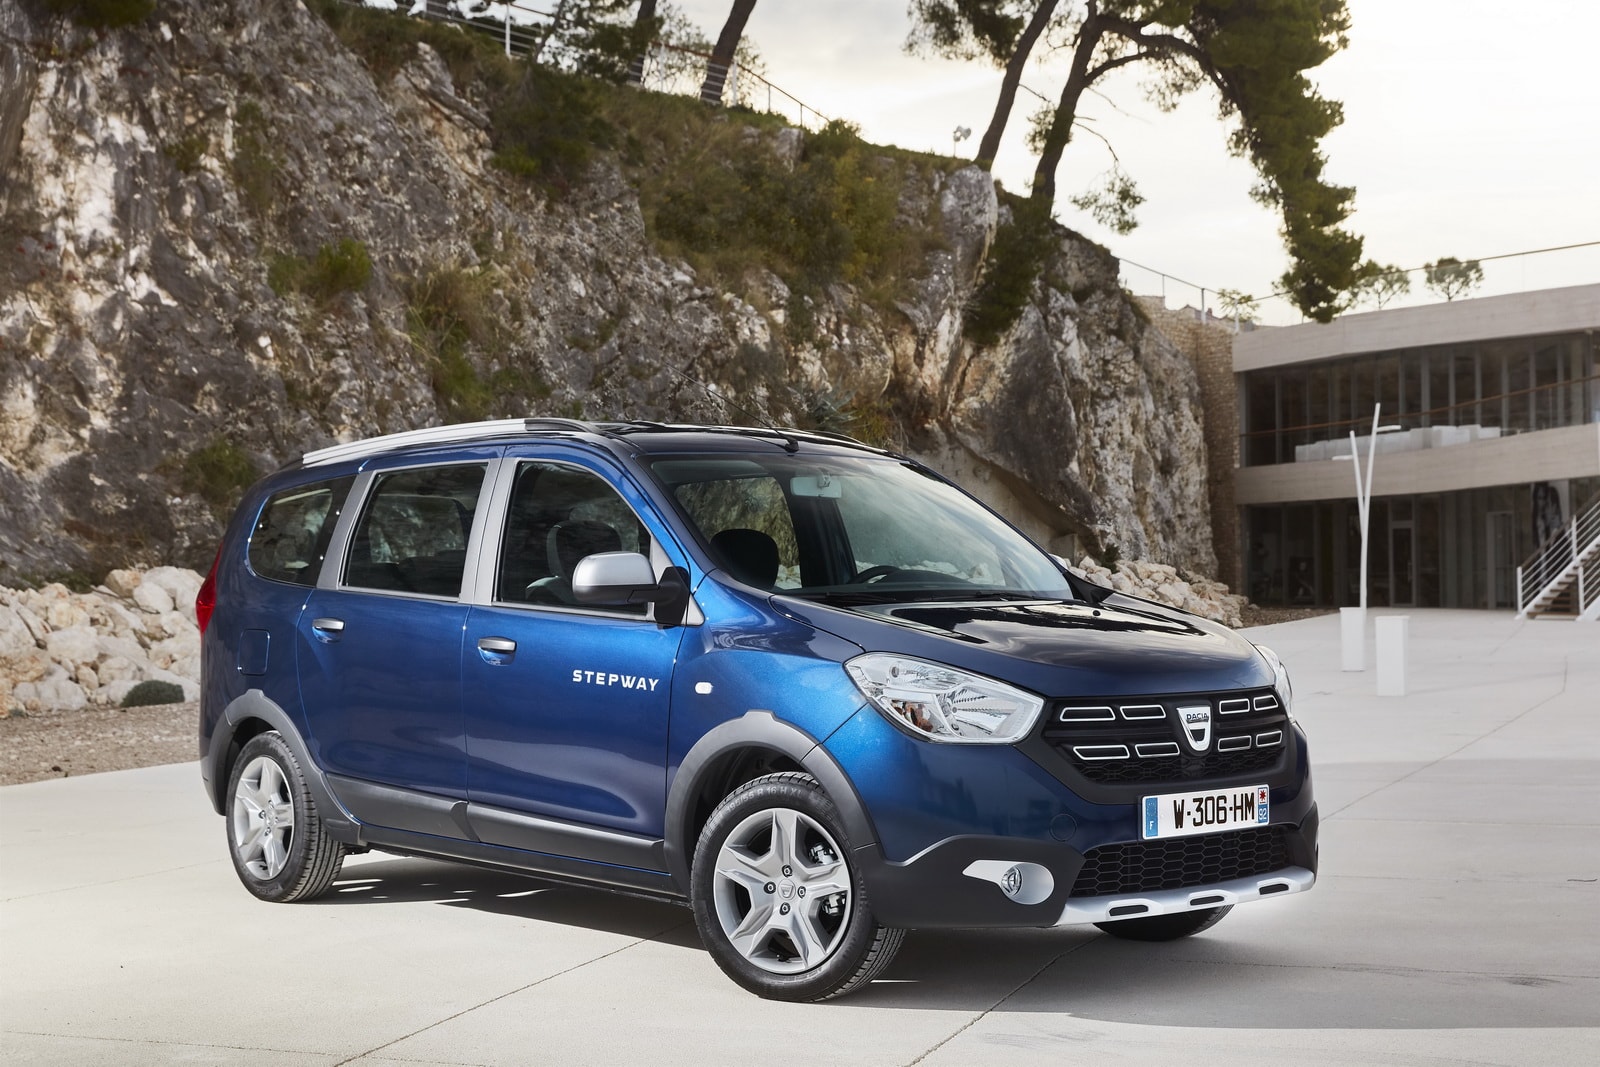 https://s1.cdn.autoevolution.com/images/news/dacia-dokker-and-lodgy-facelift-revealed-with-fresh-grille-new-steering-wheel-114789_1.jpg